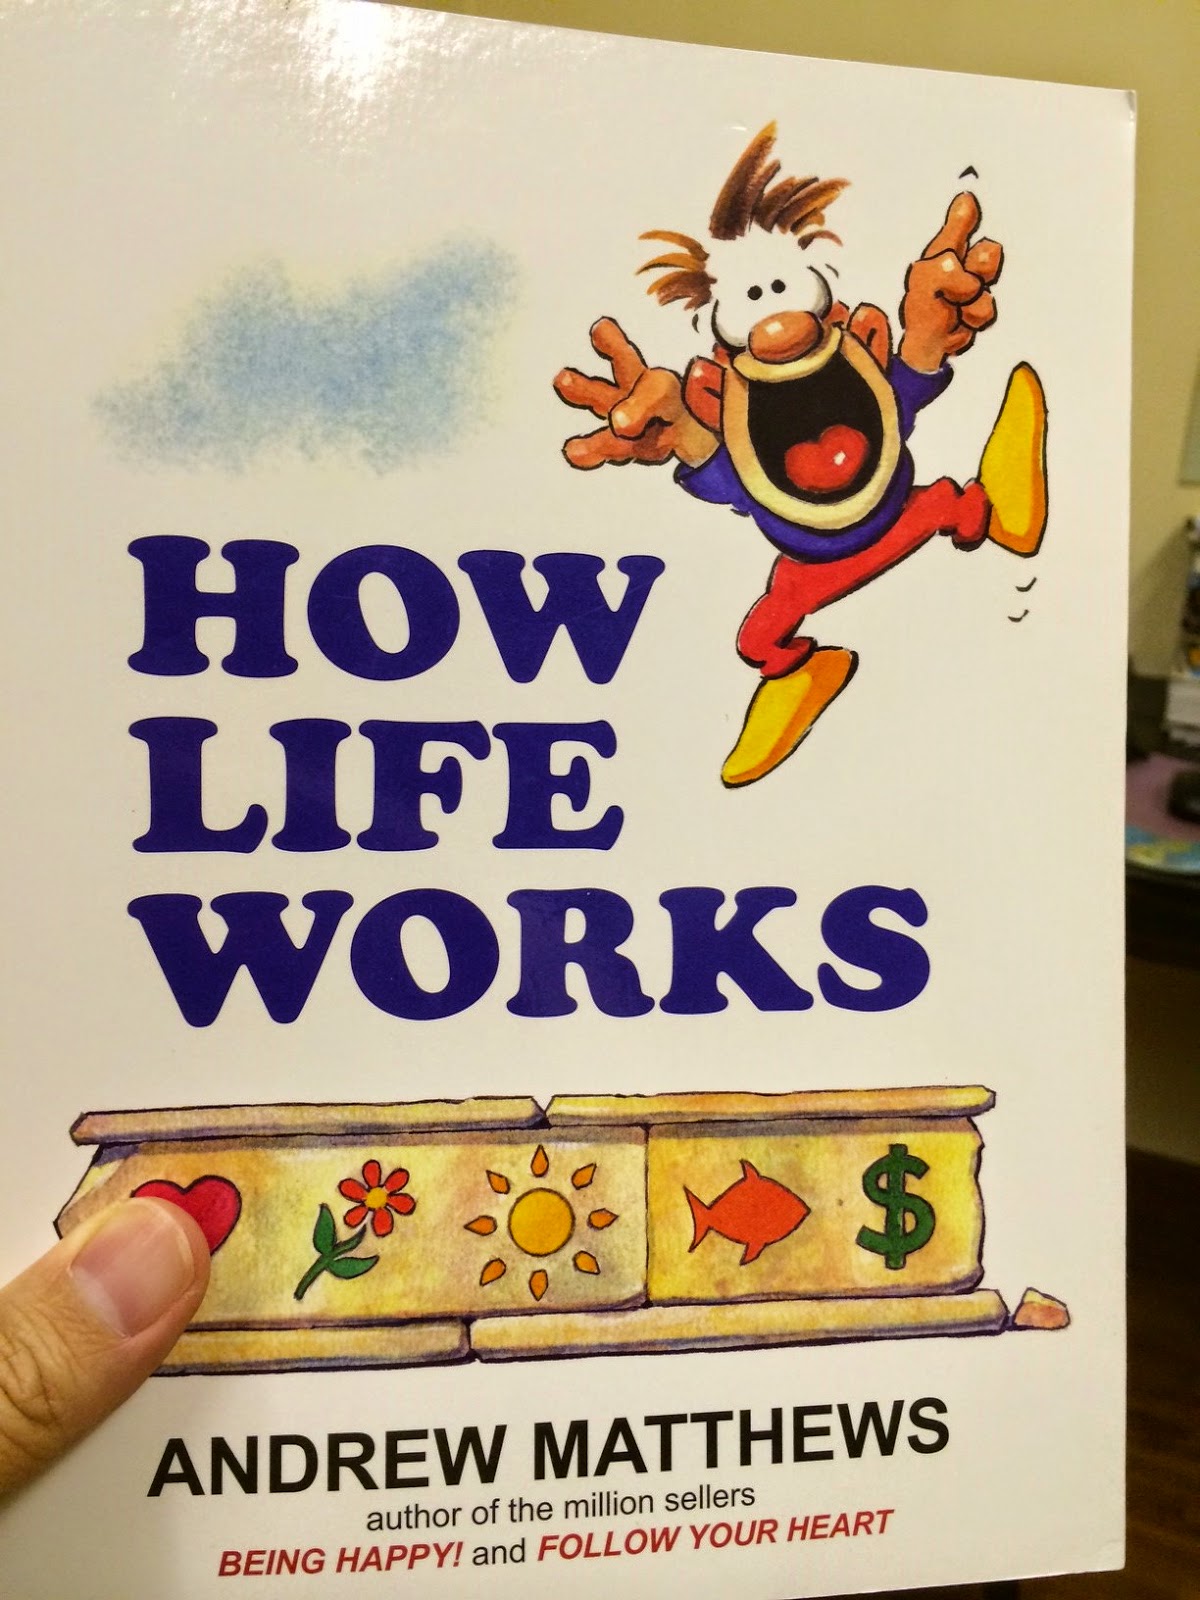 How life works by andrew matthews